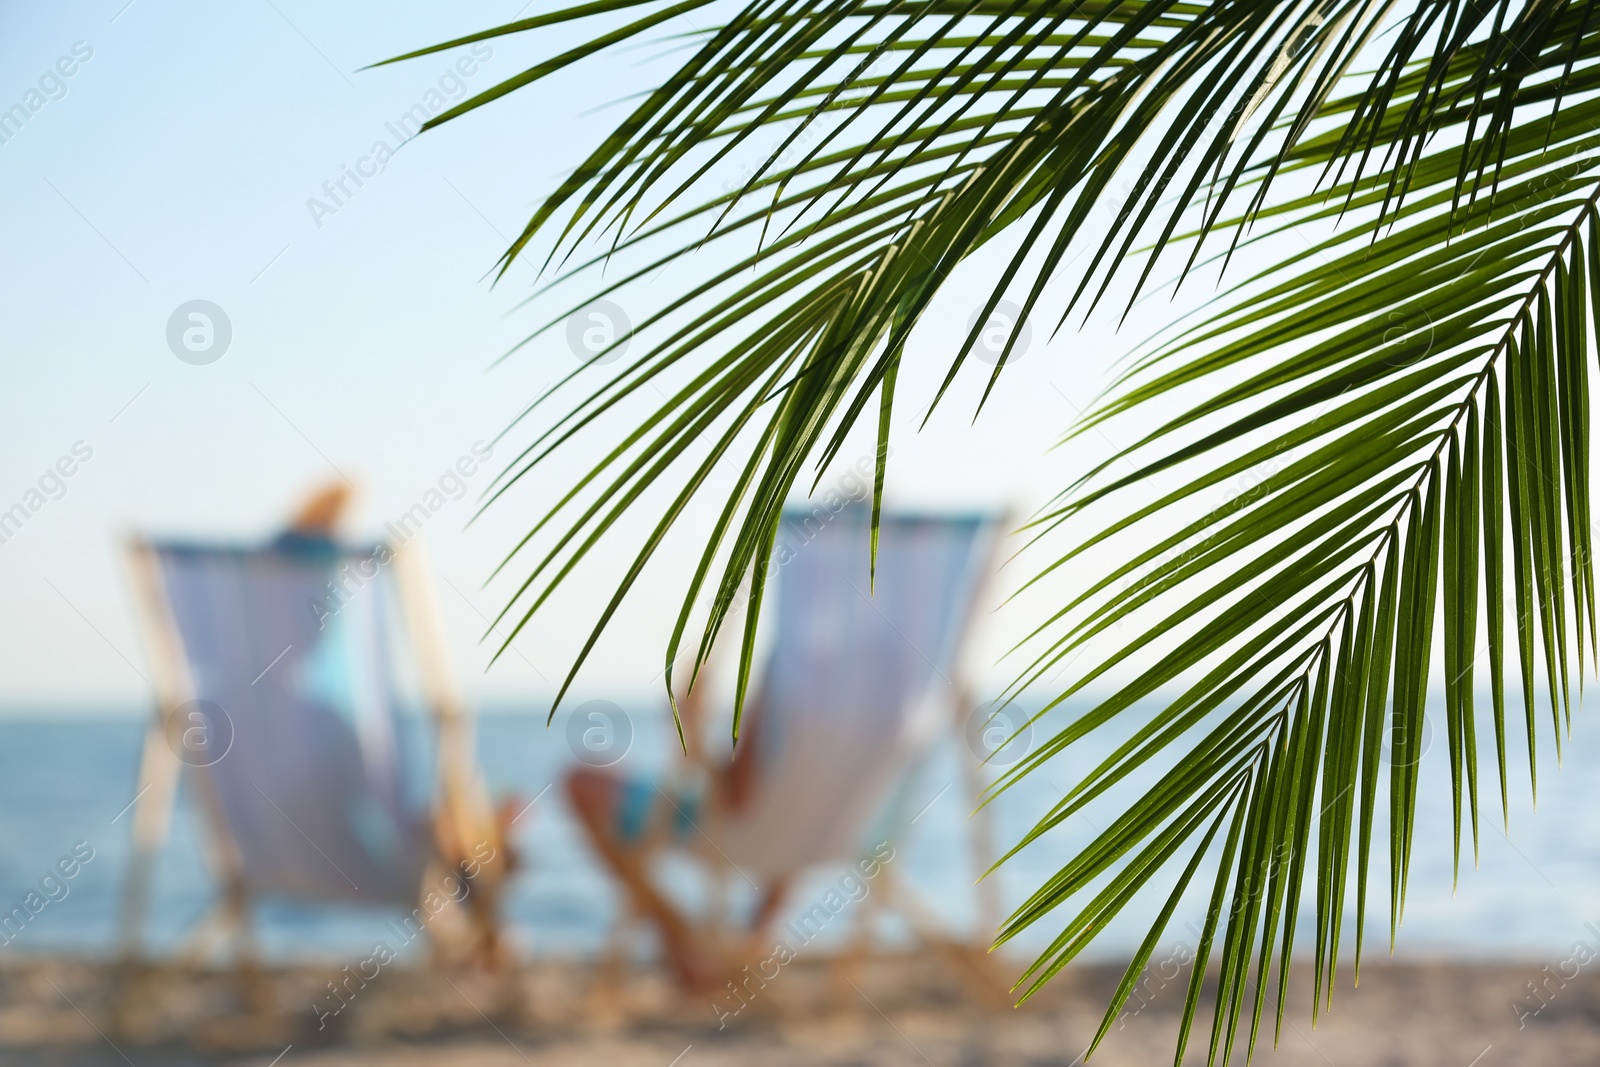 Photo of Palm branches and couple in beach chairs on background